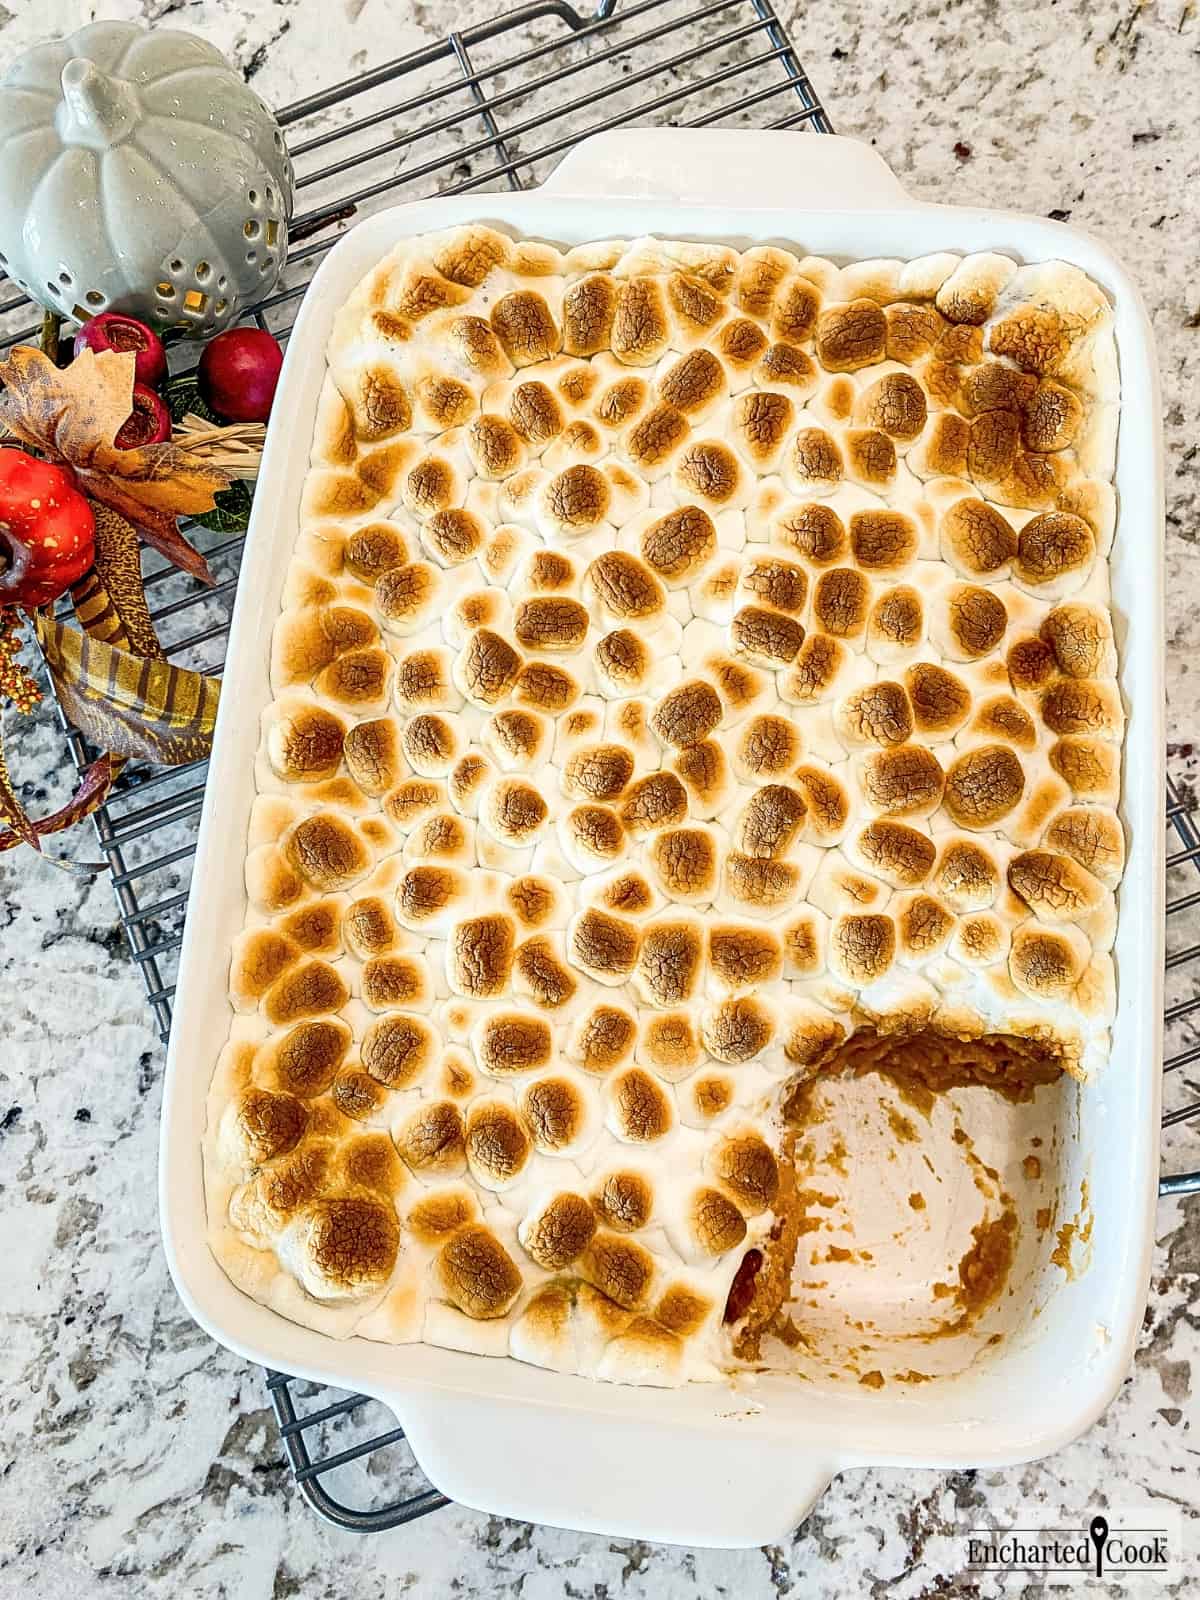 A fully baked sweet potato casserole topped with a layer of melted and toasted miniature marshmallows with a spoonful already served.